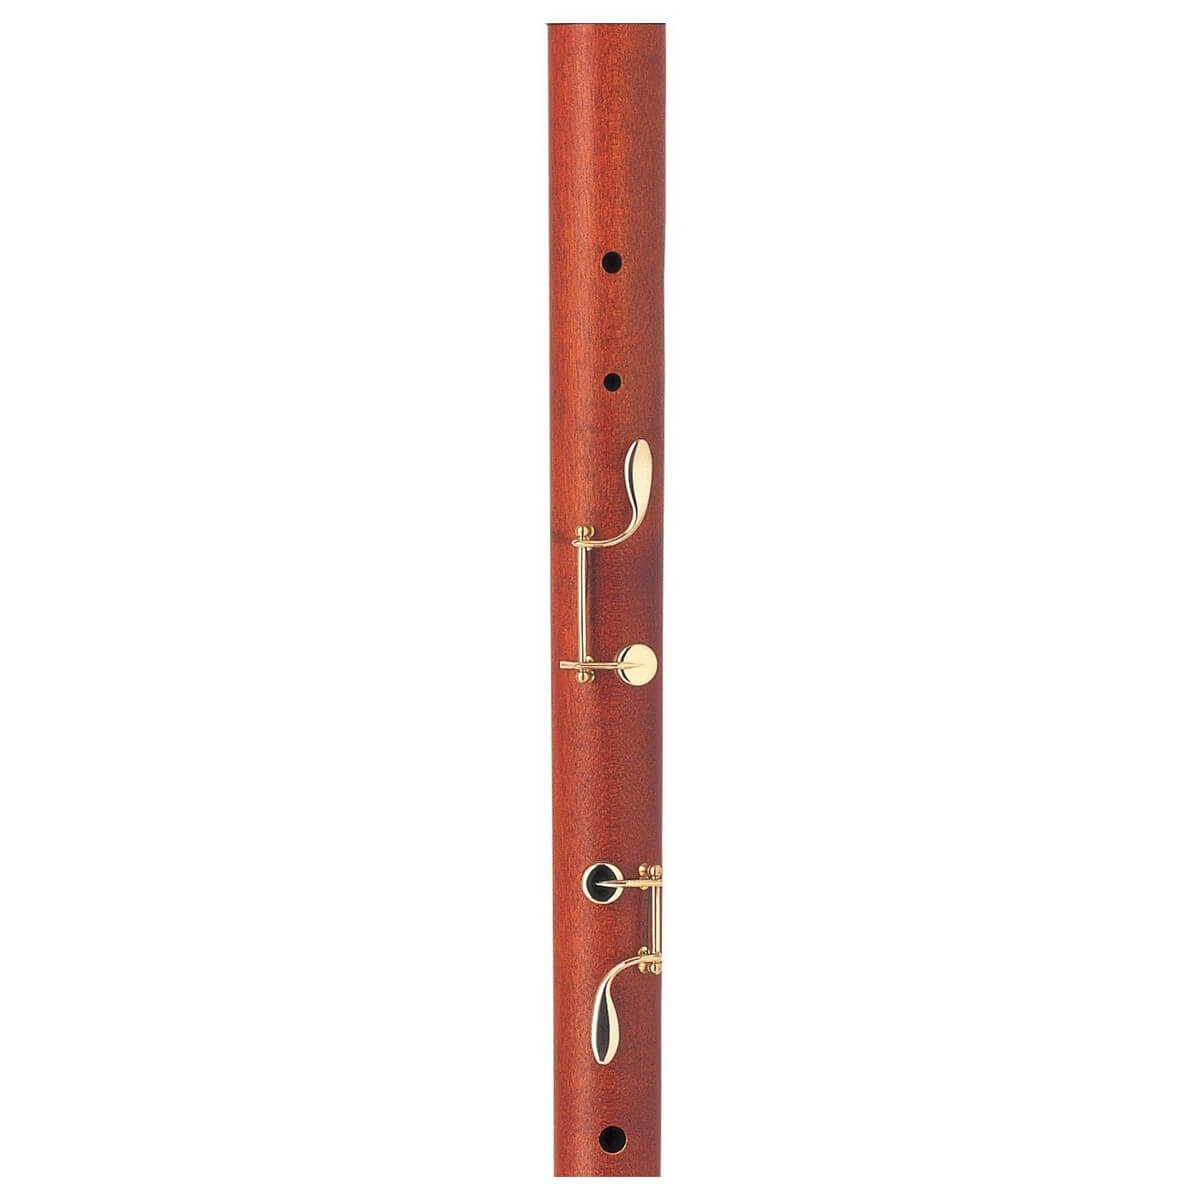 Great Bass Recorder